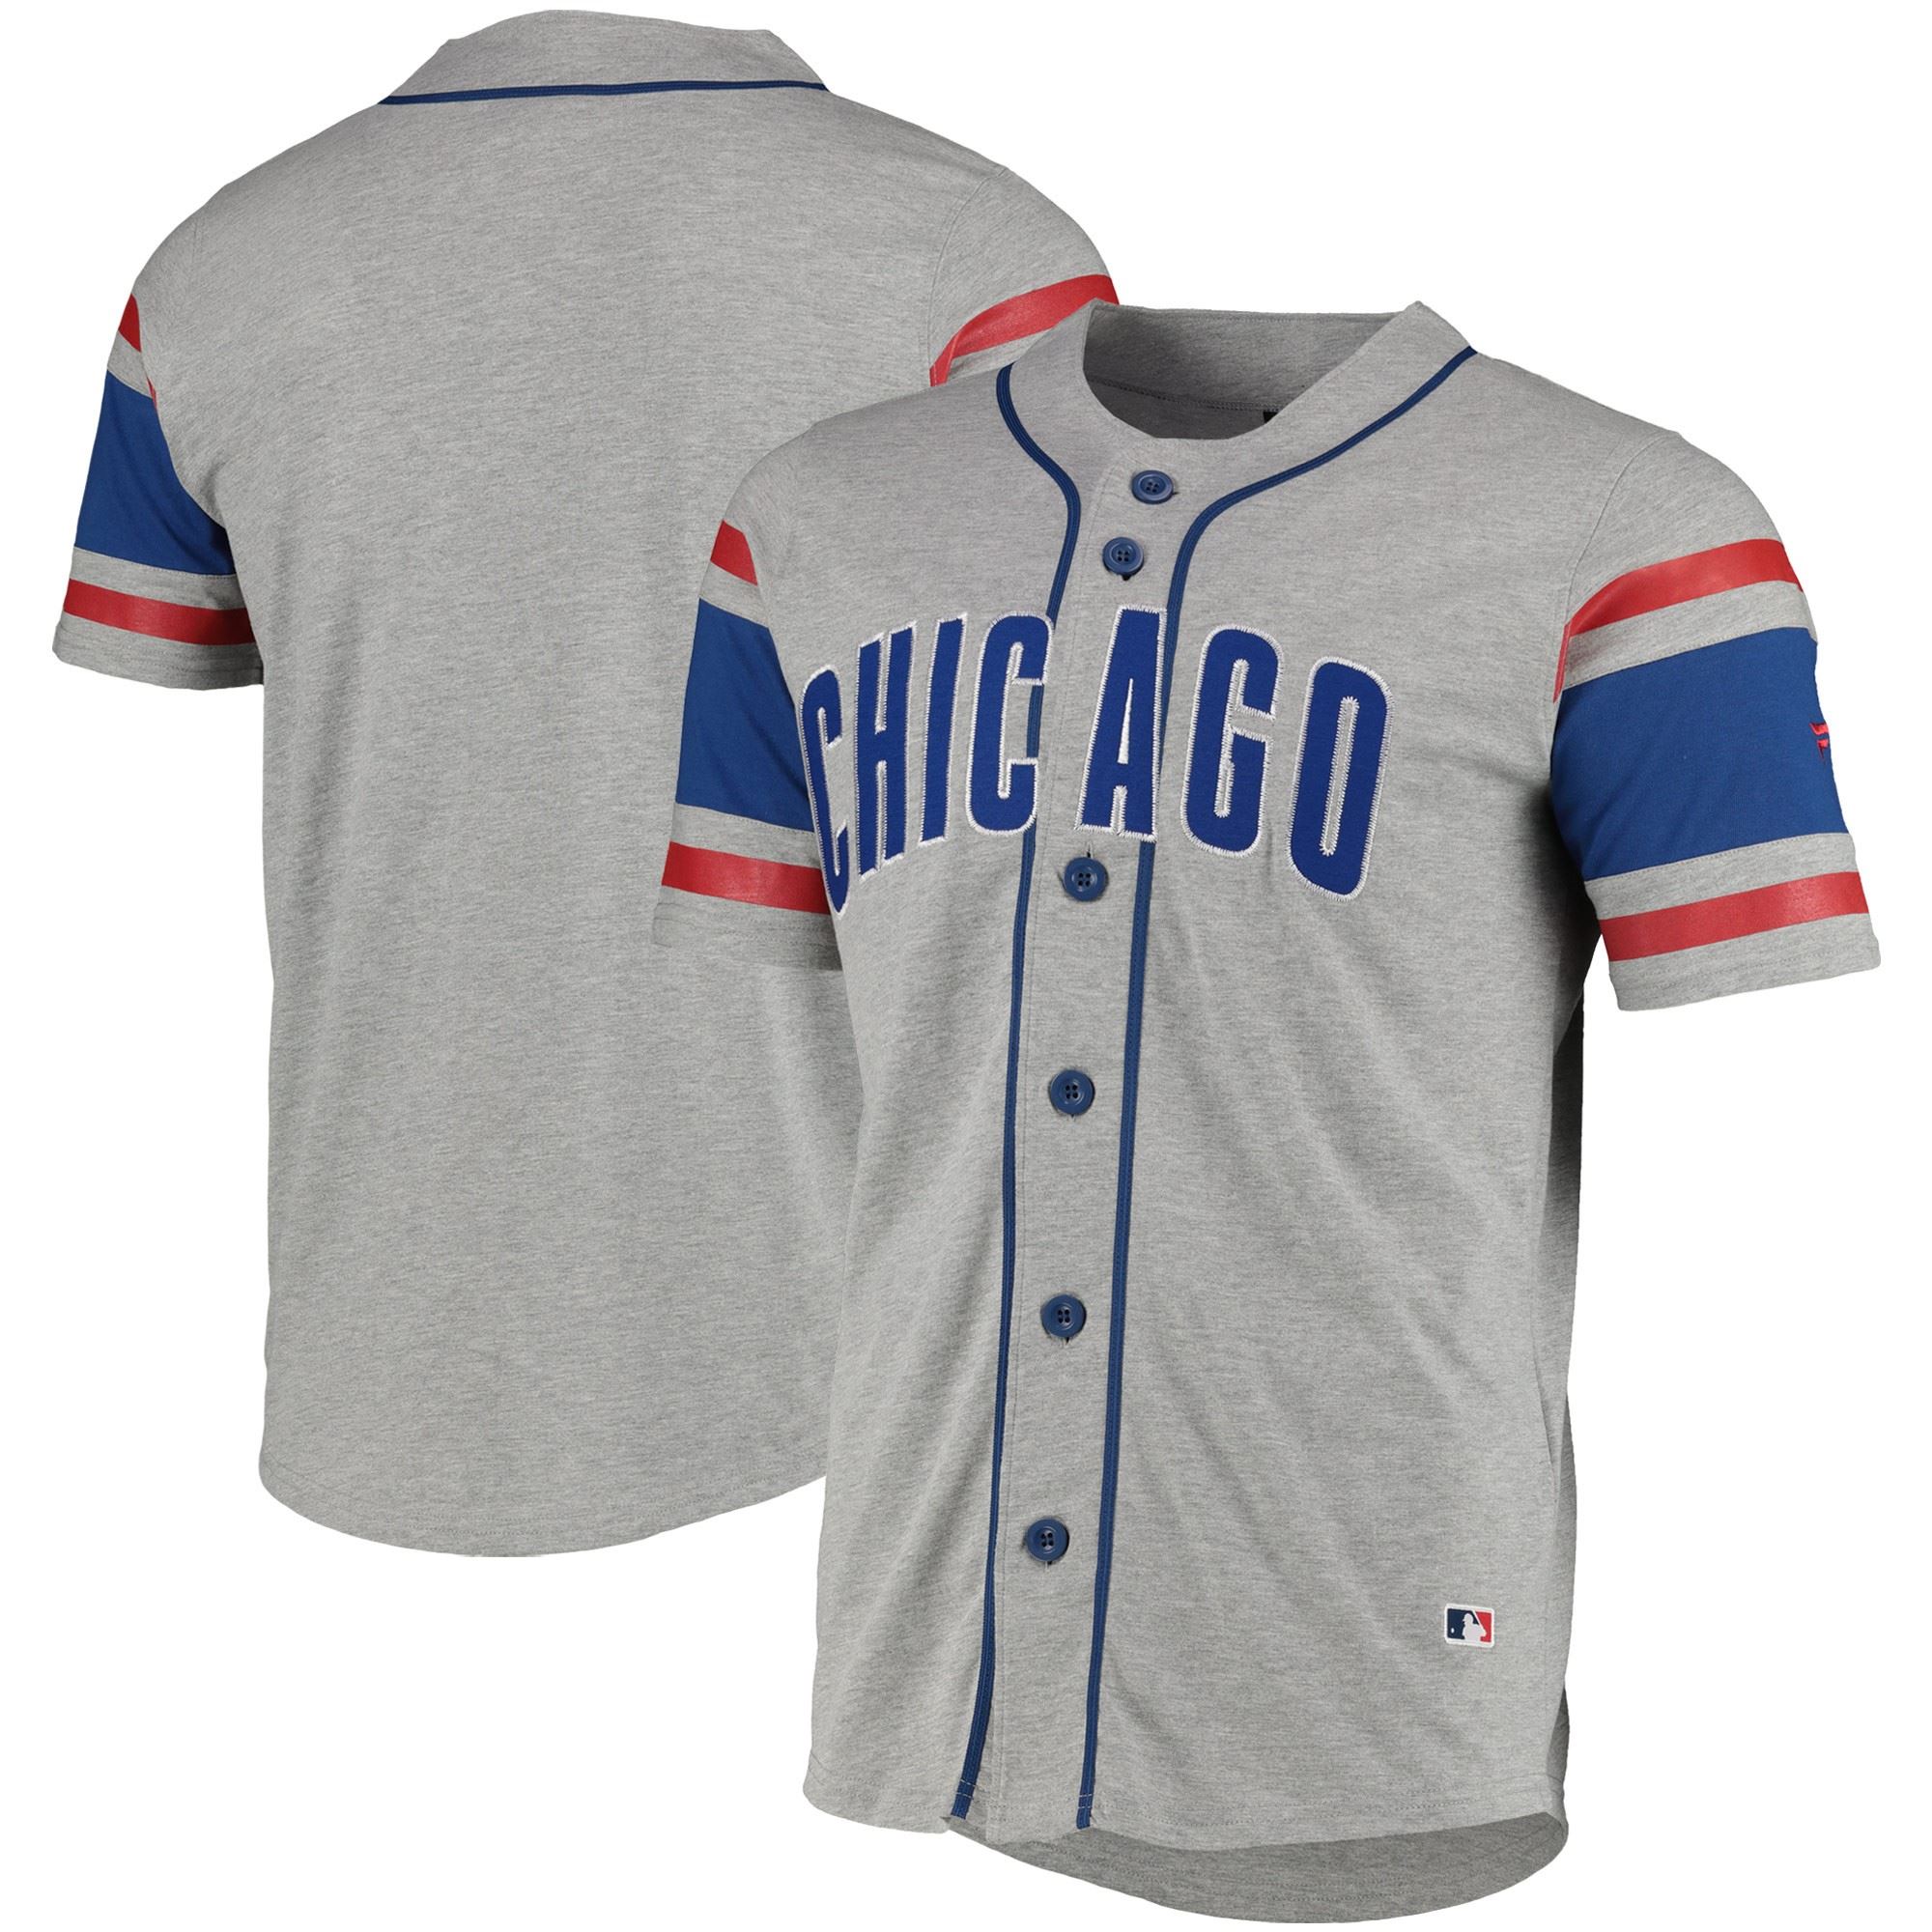 Chicago Cubs MLB Cotton Supporters Jersey Fanatics